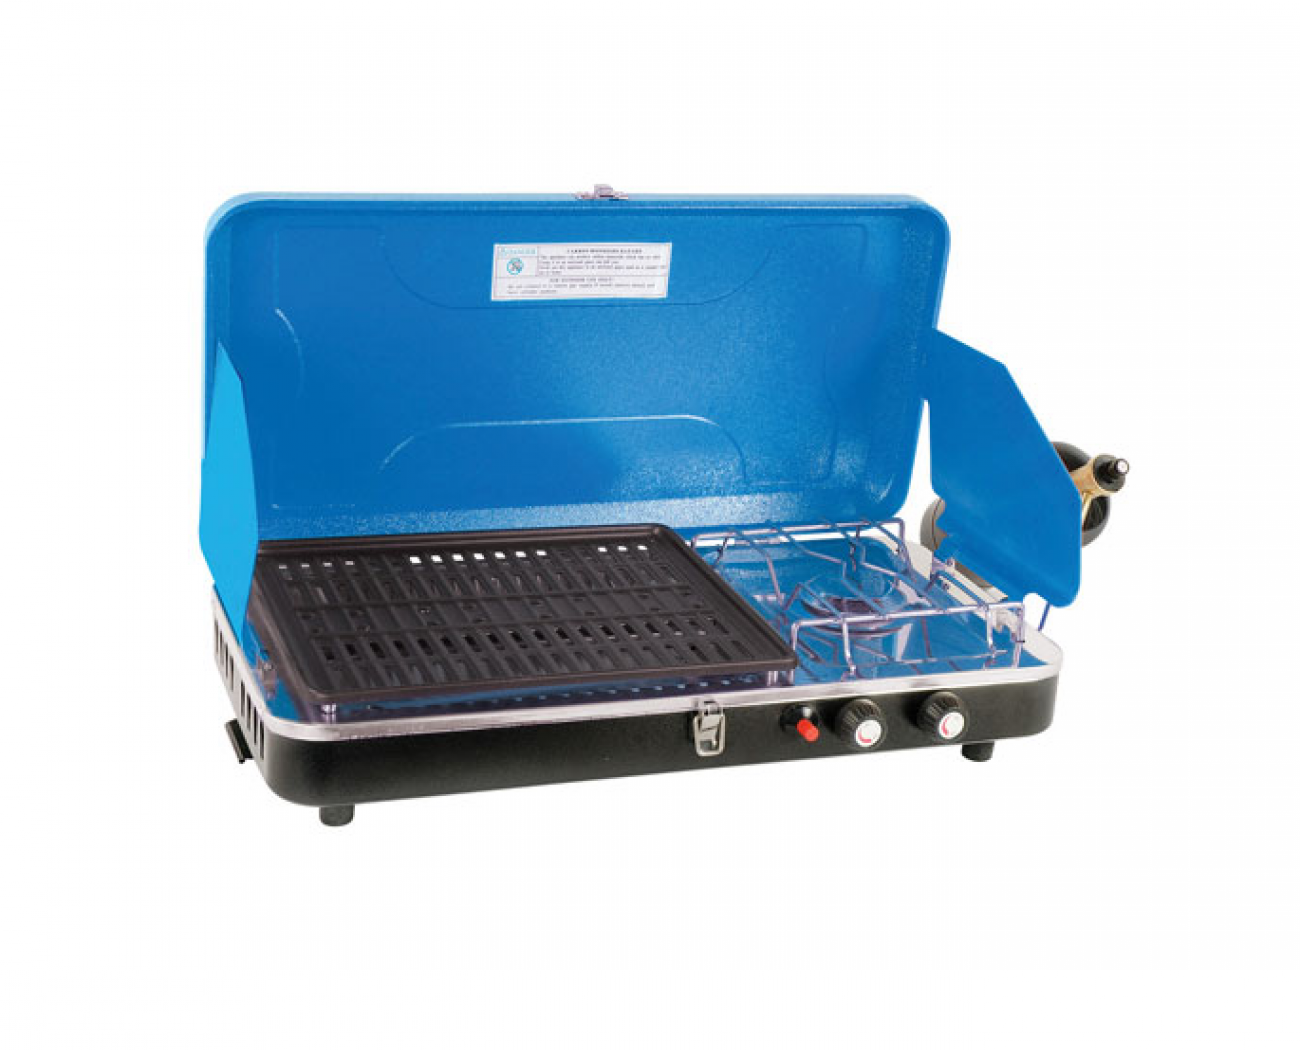 World Famous Propane Camping Stove with Grill - 10,000 BTU - Blue